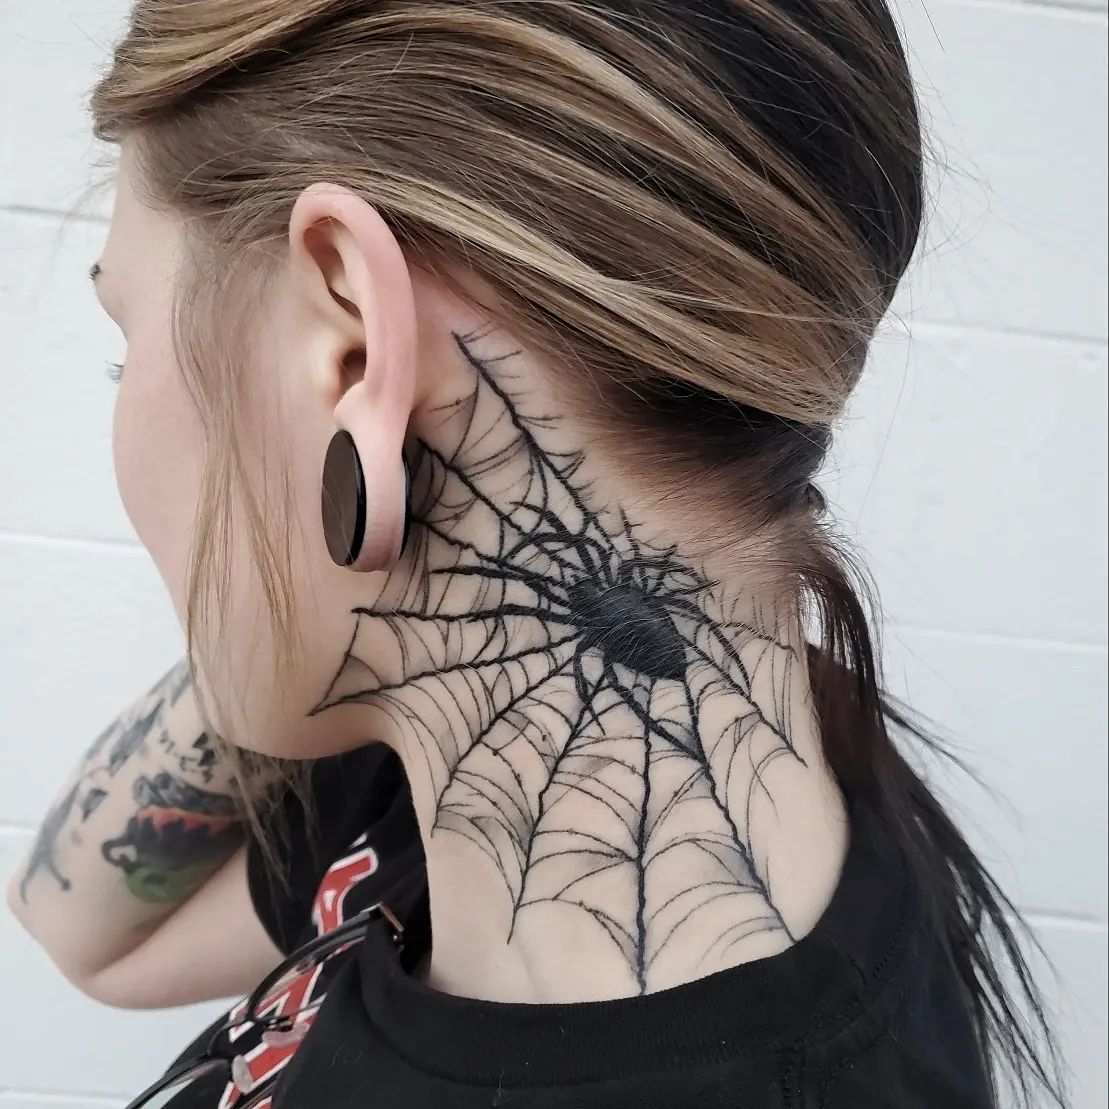 Spider tattoo meaning neck